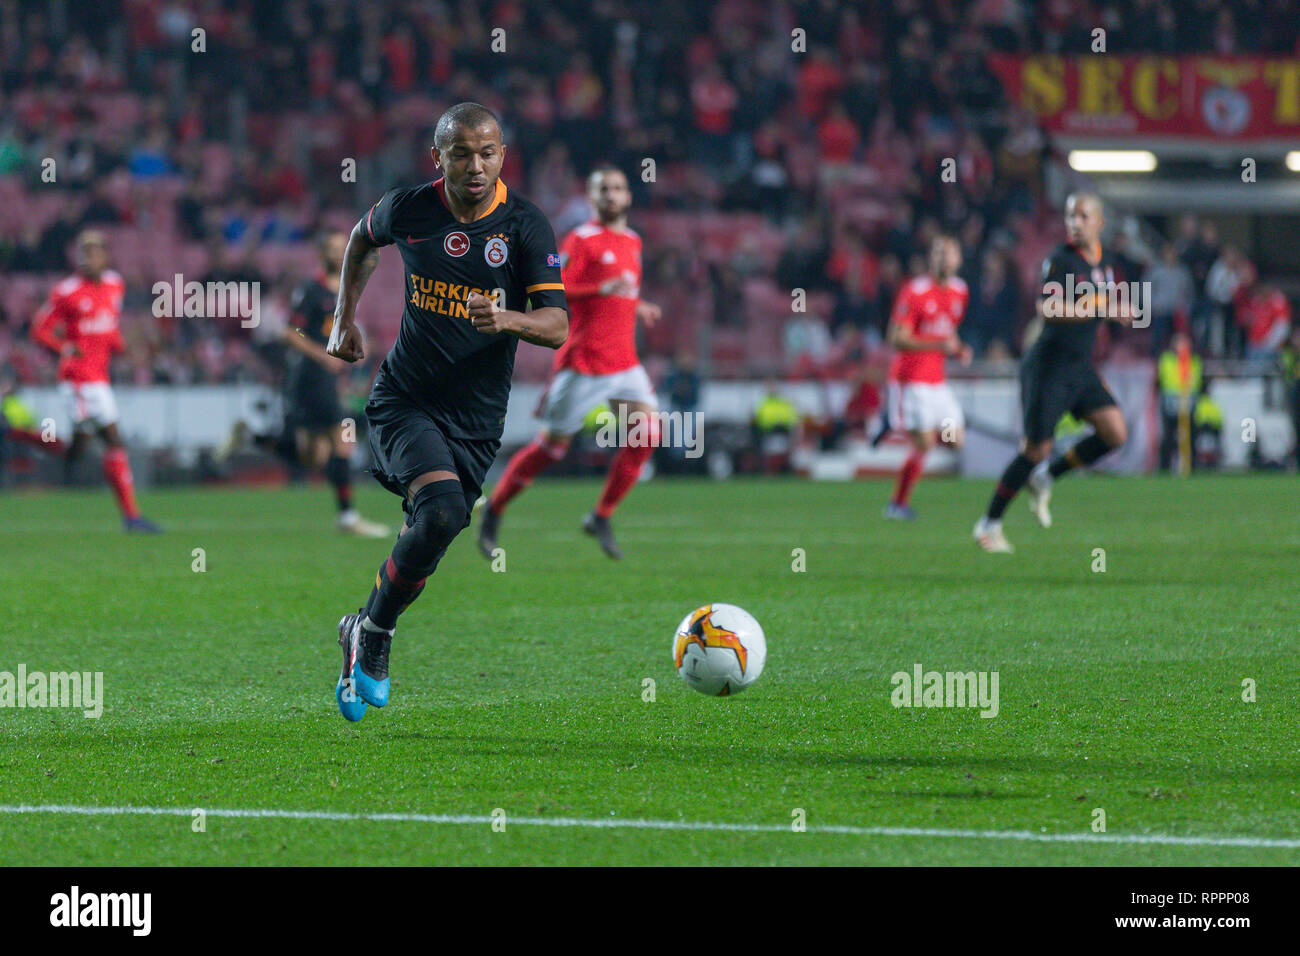 Lisbon, Portugal. 21st Feb, 2019. February 21, 2019. Lisbon, Portugal. Galatasaray's defender from Brazil Mariano (2) in action during the game of the UEFA Europa League, Round of 32, SL Benfica vs Galatasaray SK Credit: Alexandre de Sousa/Alamy Live News Stock Photo